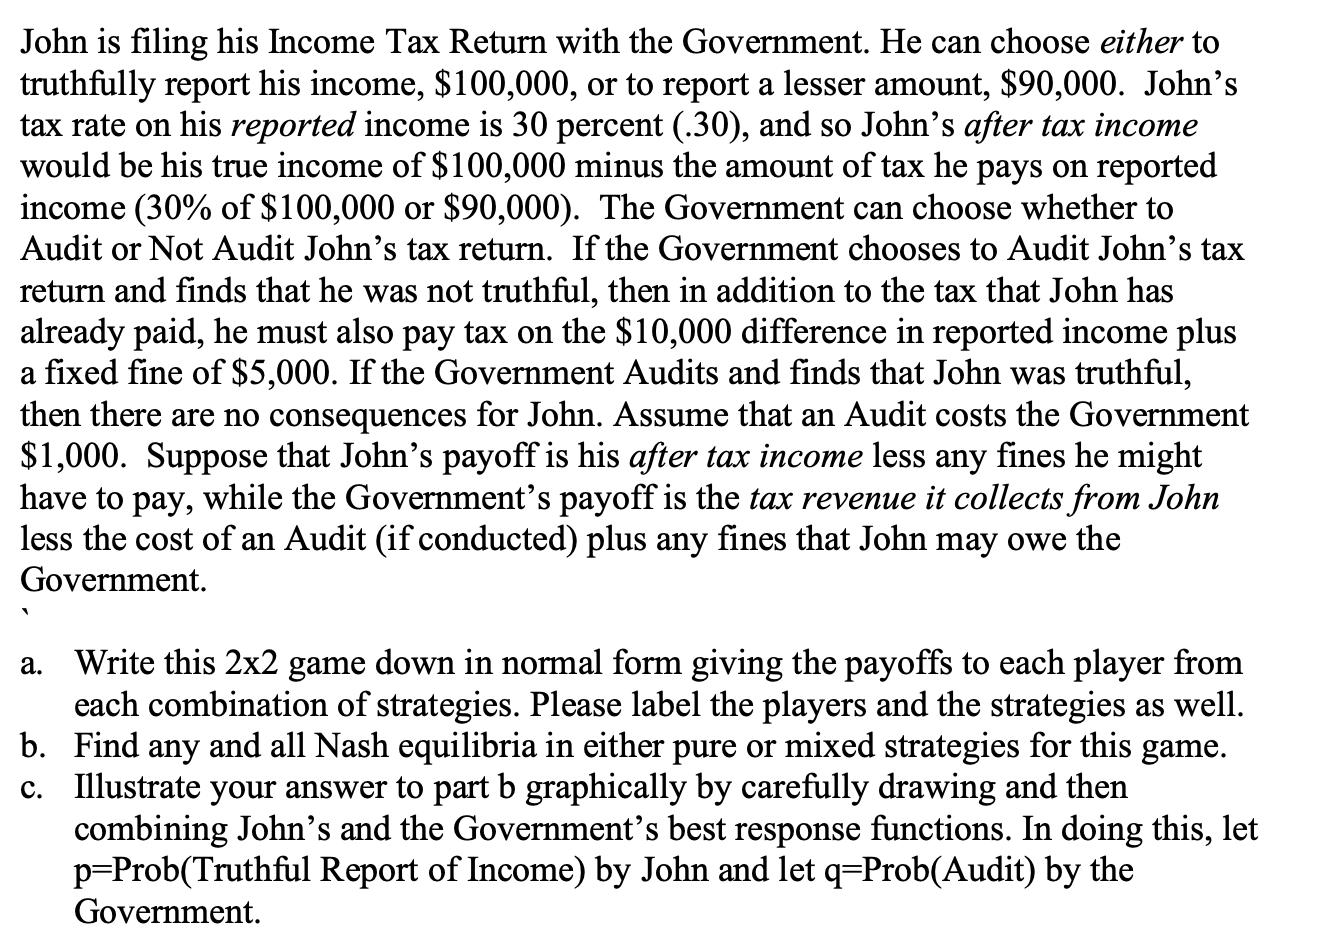 John is filing his Income Tax Return with the Government. He can choose either to truthfully report his income, $100,000, or